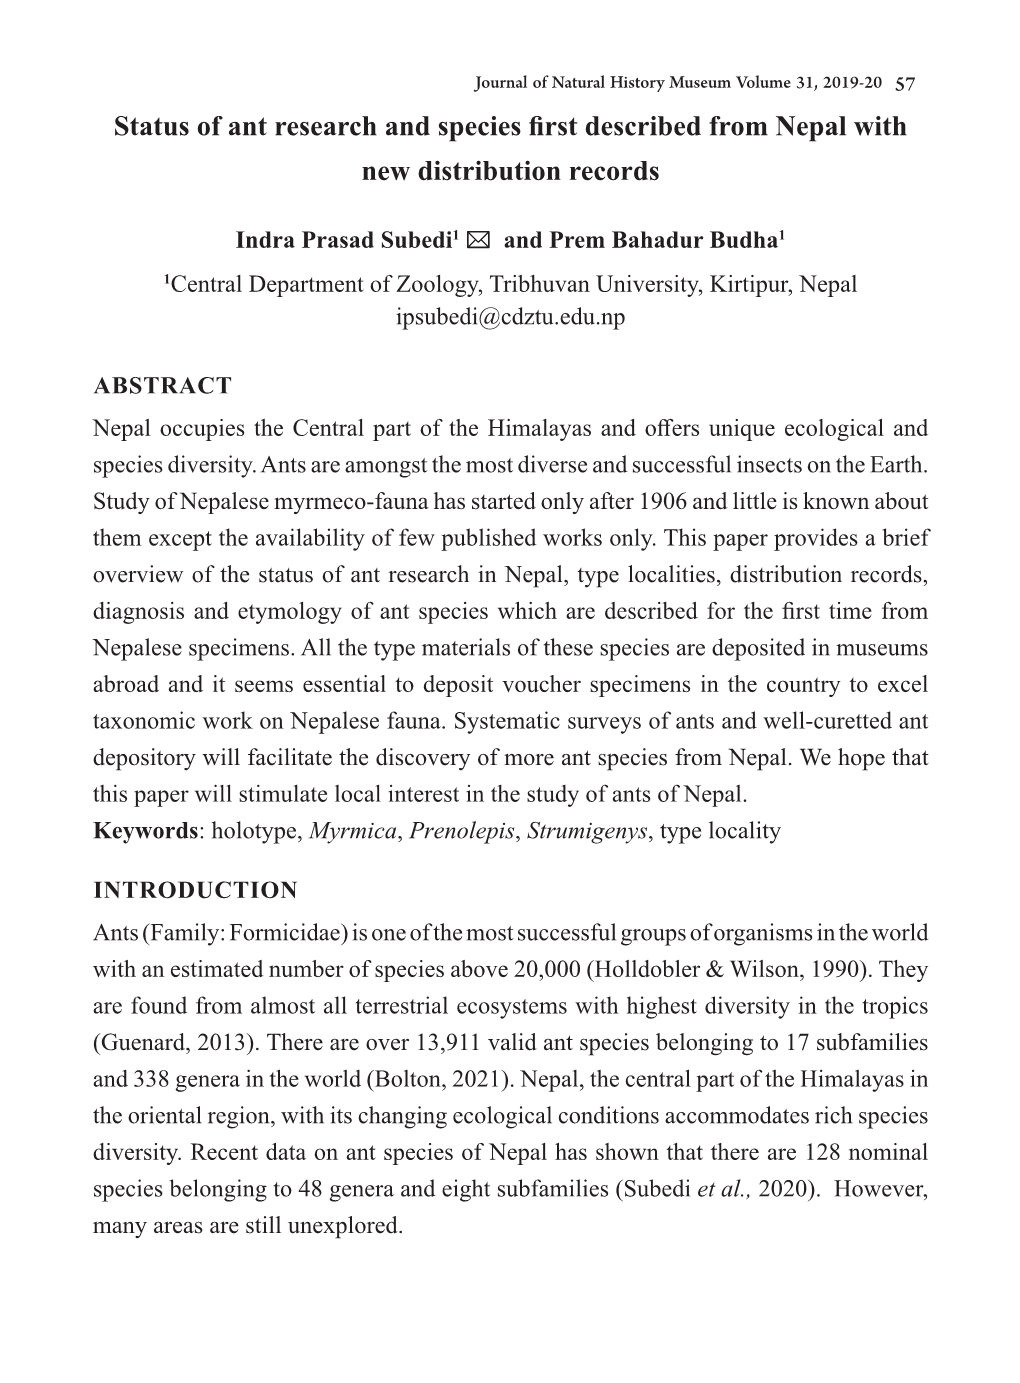 Status of Ant Research and Species First Described from Nepal with New Distribution Records